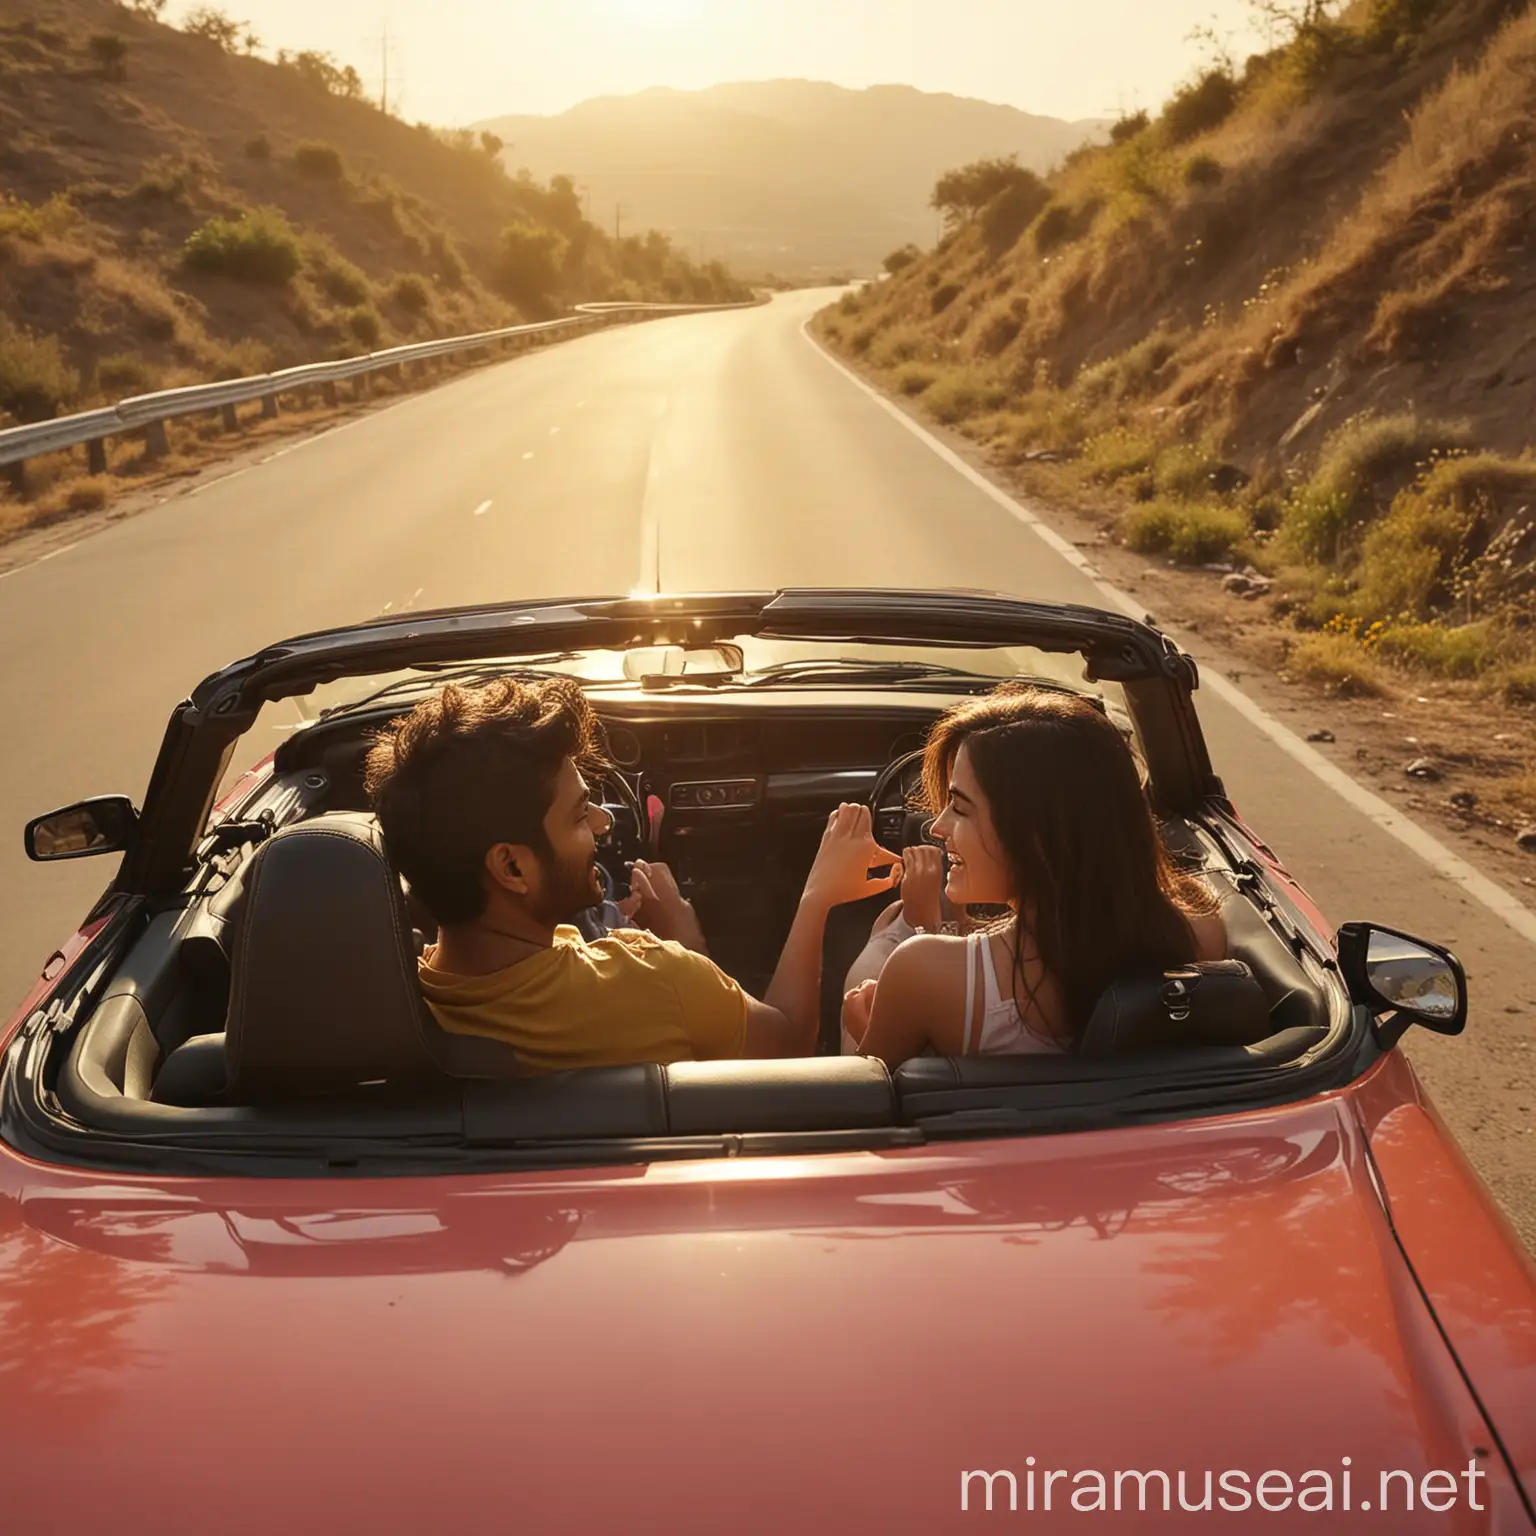 Sunny Kaushal and Girl Enjoying Convertible Ride on Scenic Highway at Sunset